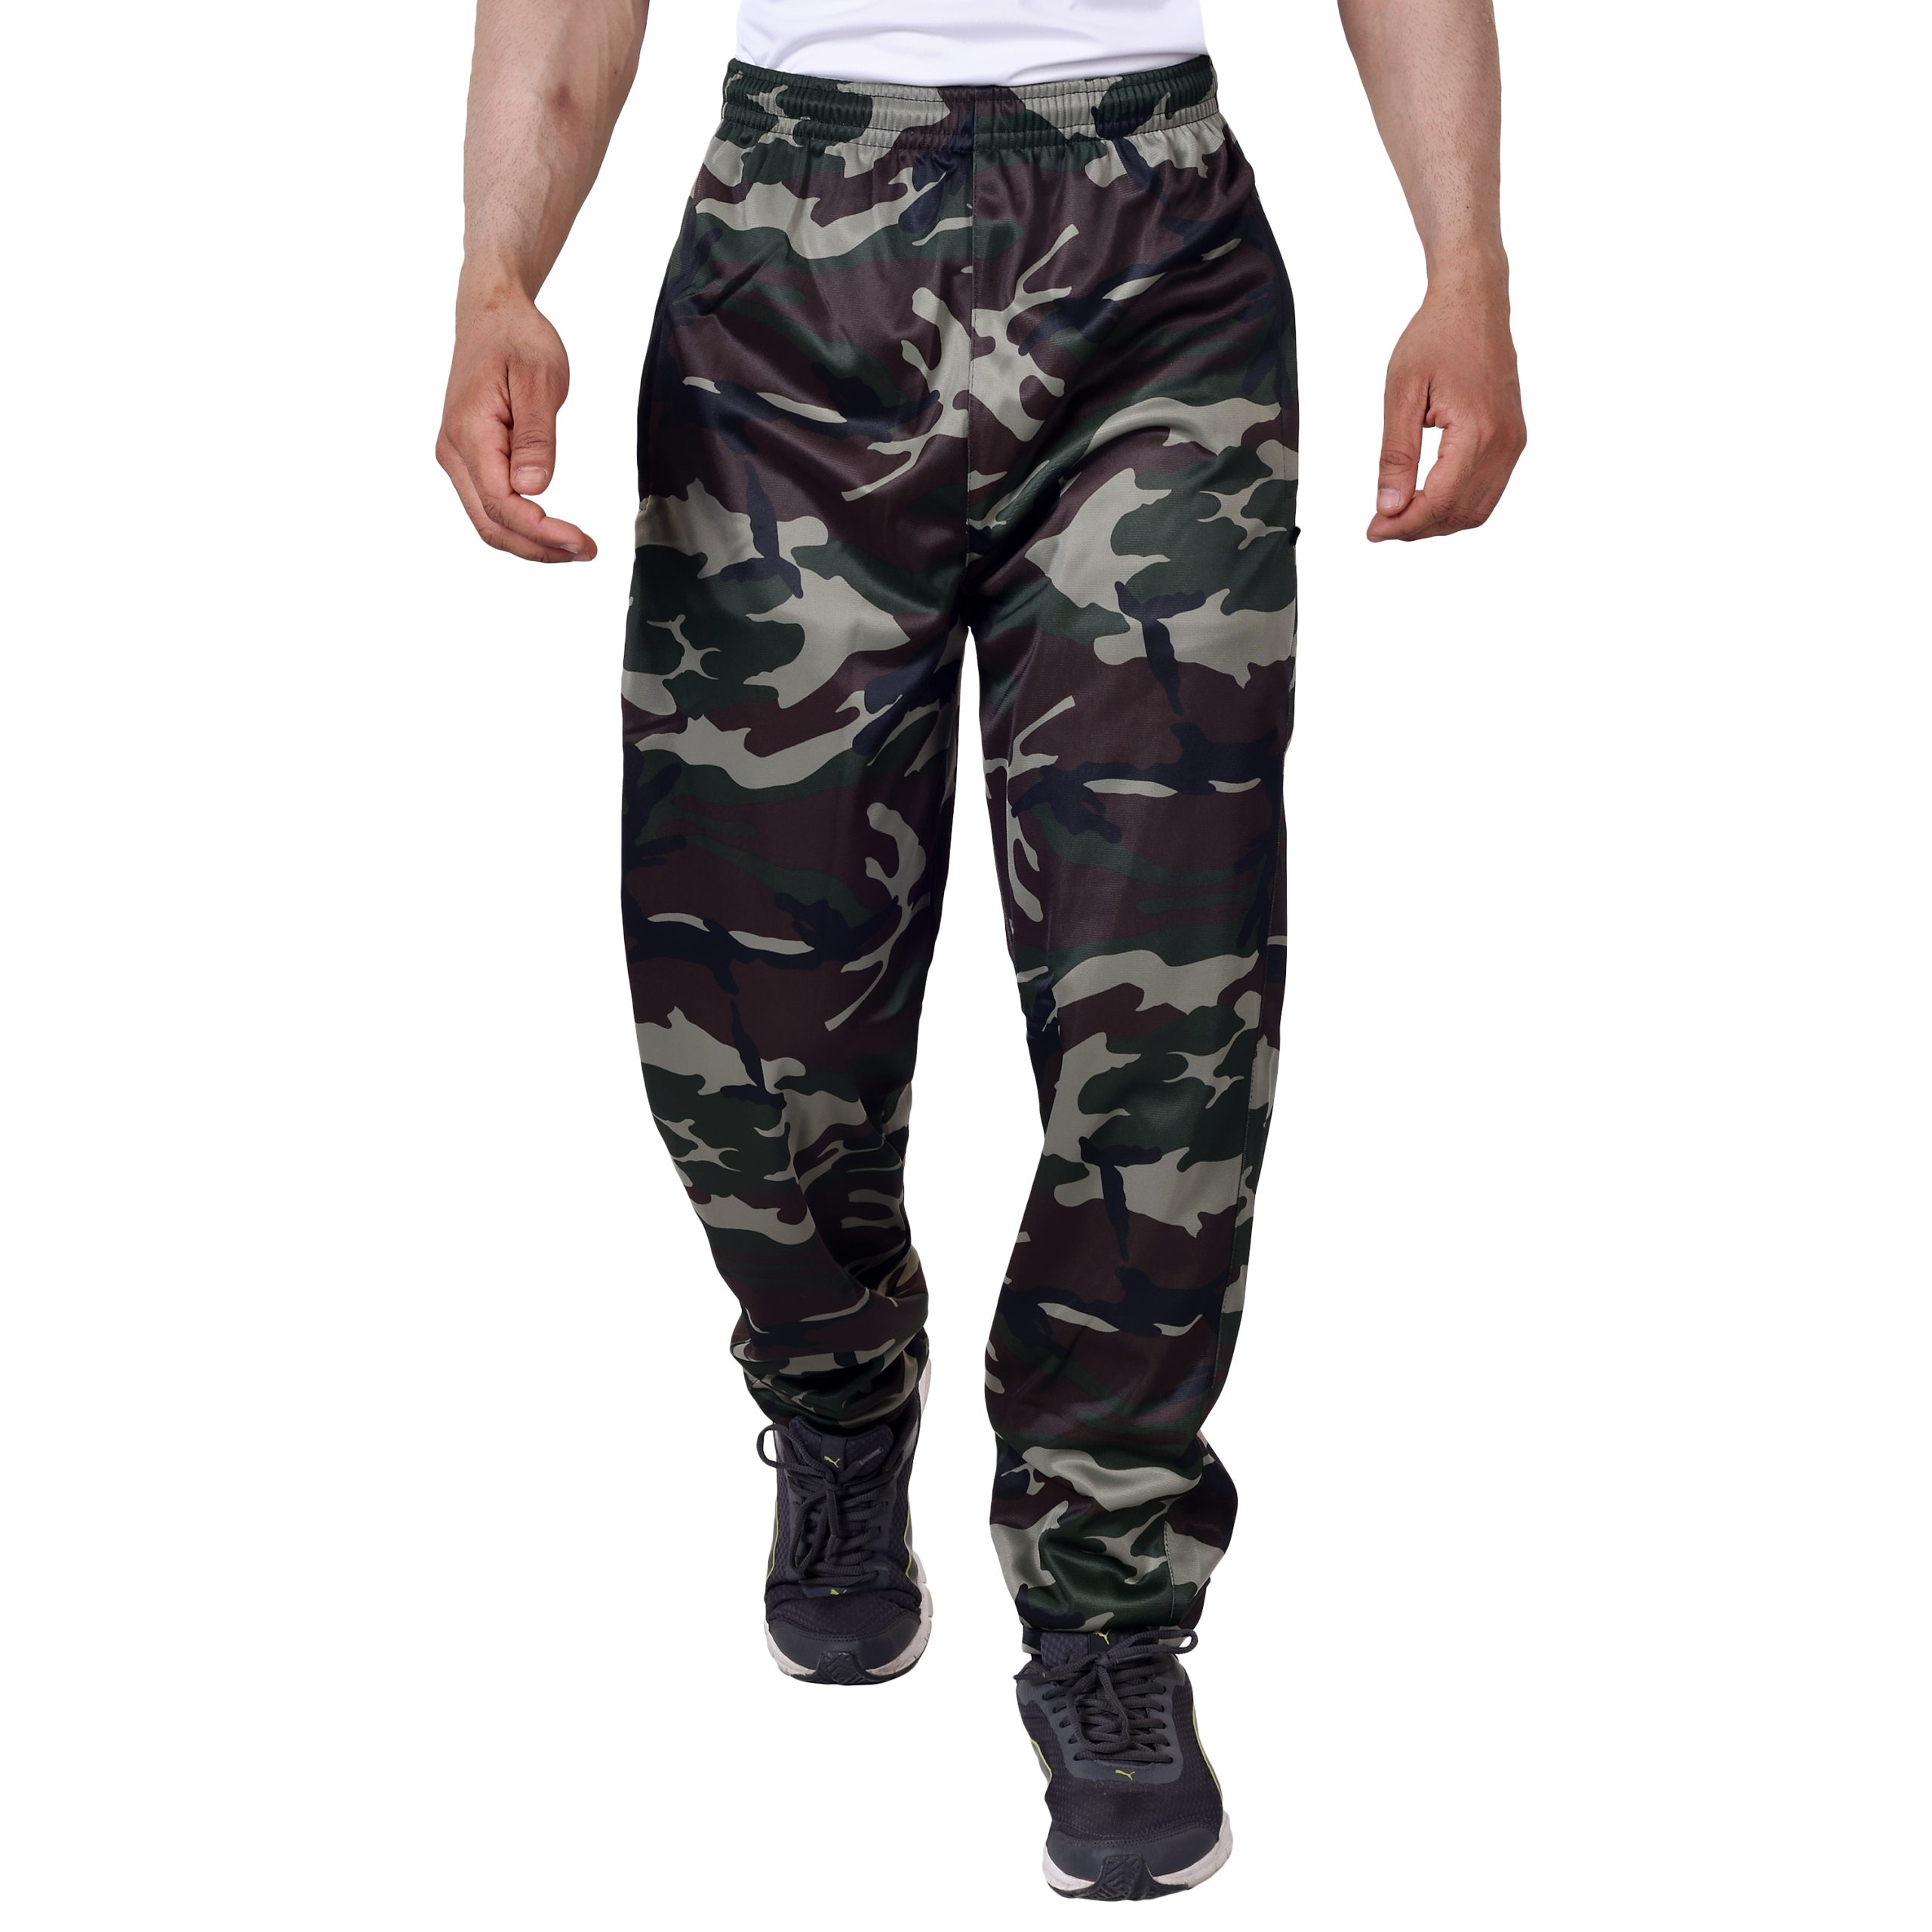 Top 6 Affordable and Stylish Cargo Pants For Men  Cargo Pants In Budget  Cargo  Pants Outfit Idea  YouTube